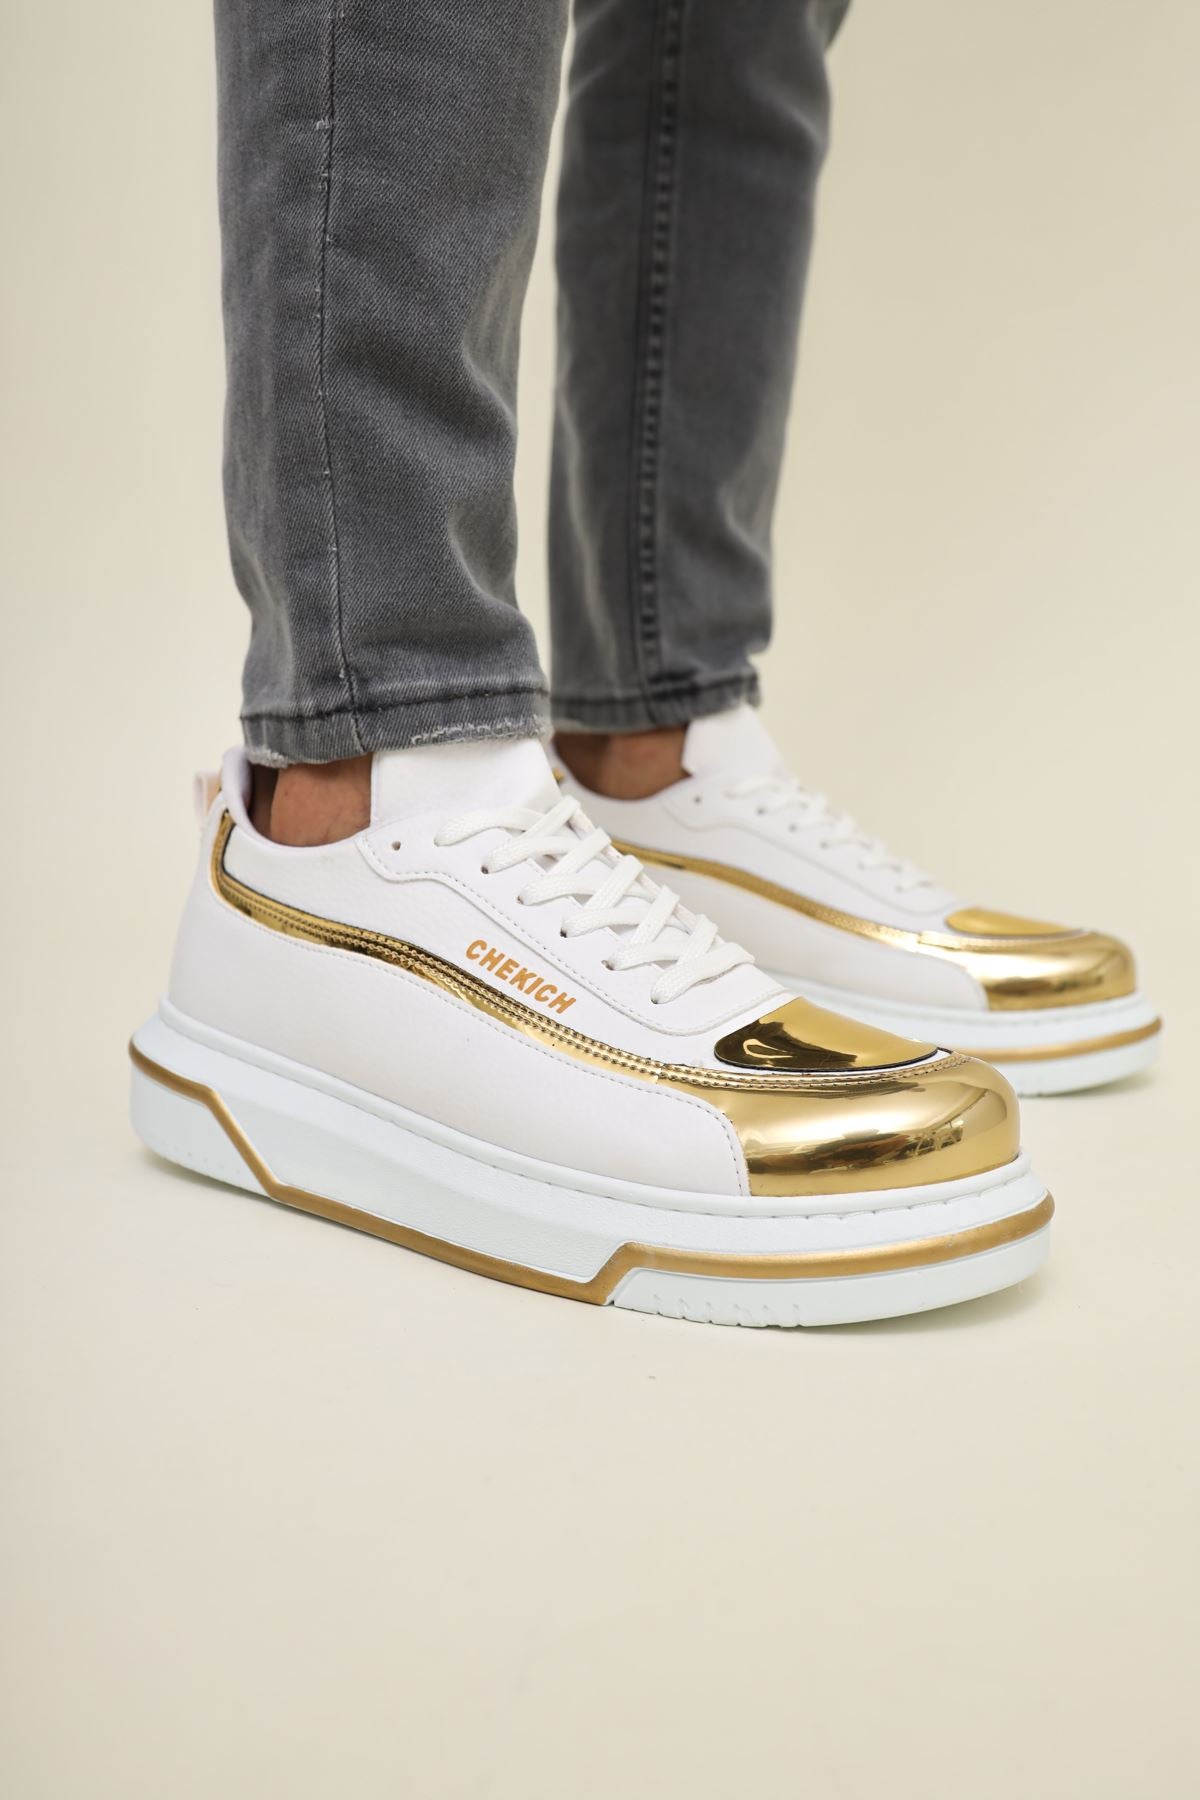 CH241 BT Men's Sneakers Shoes WHITE/GOLD - STREETMODE ™